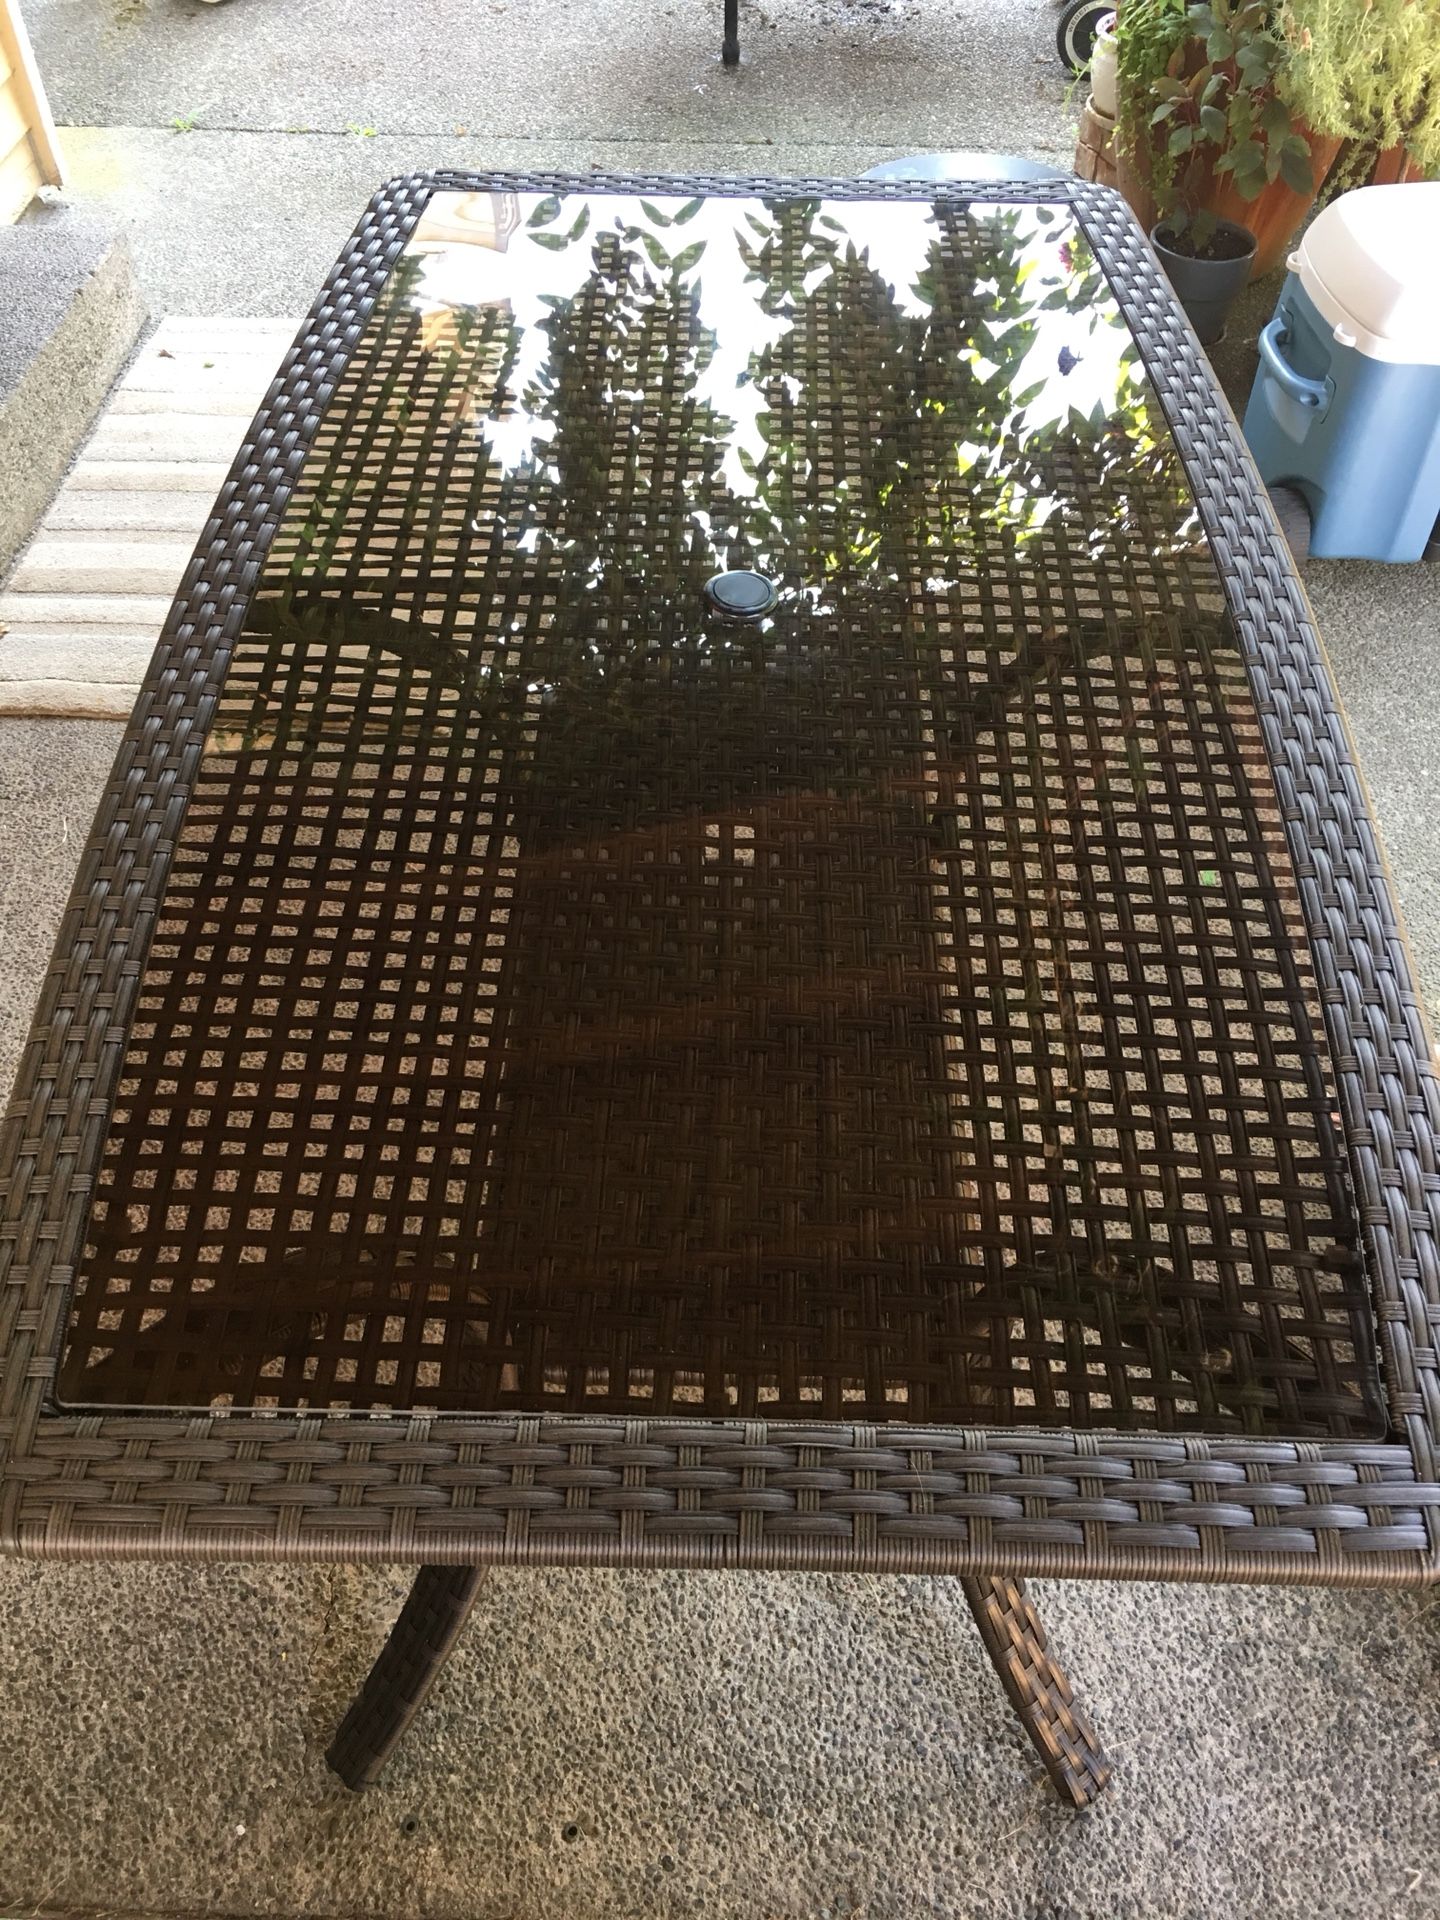 Brand new patio table